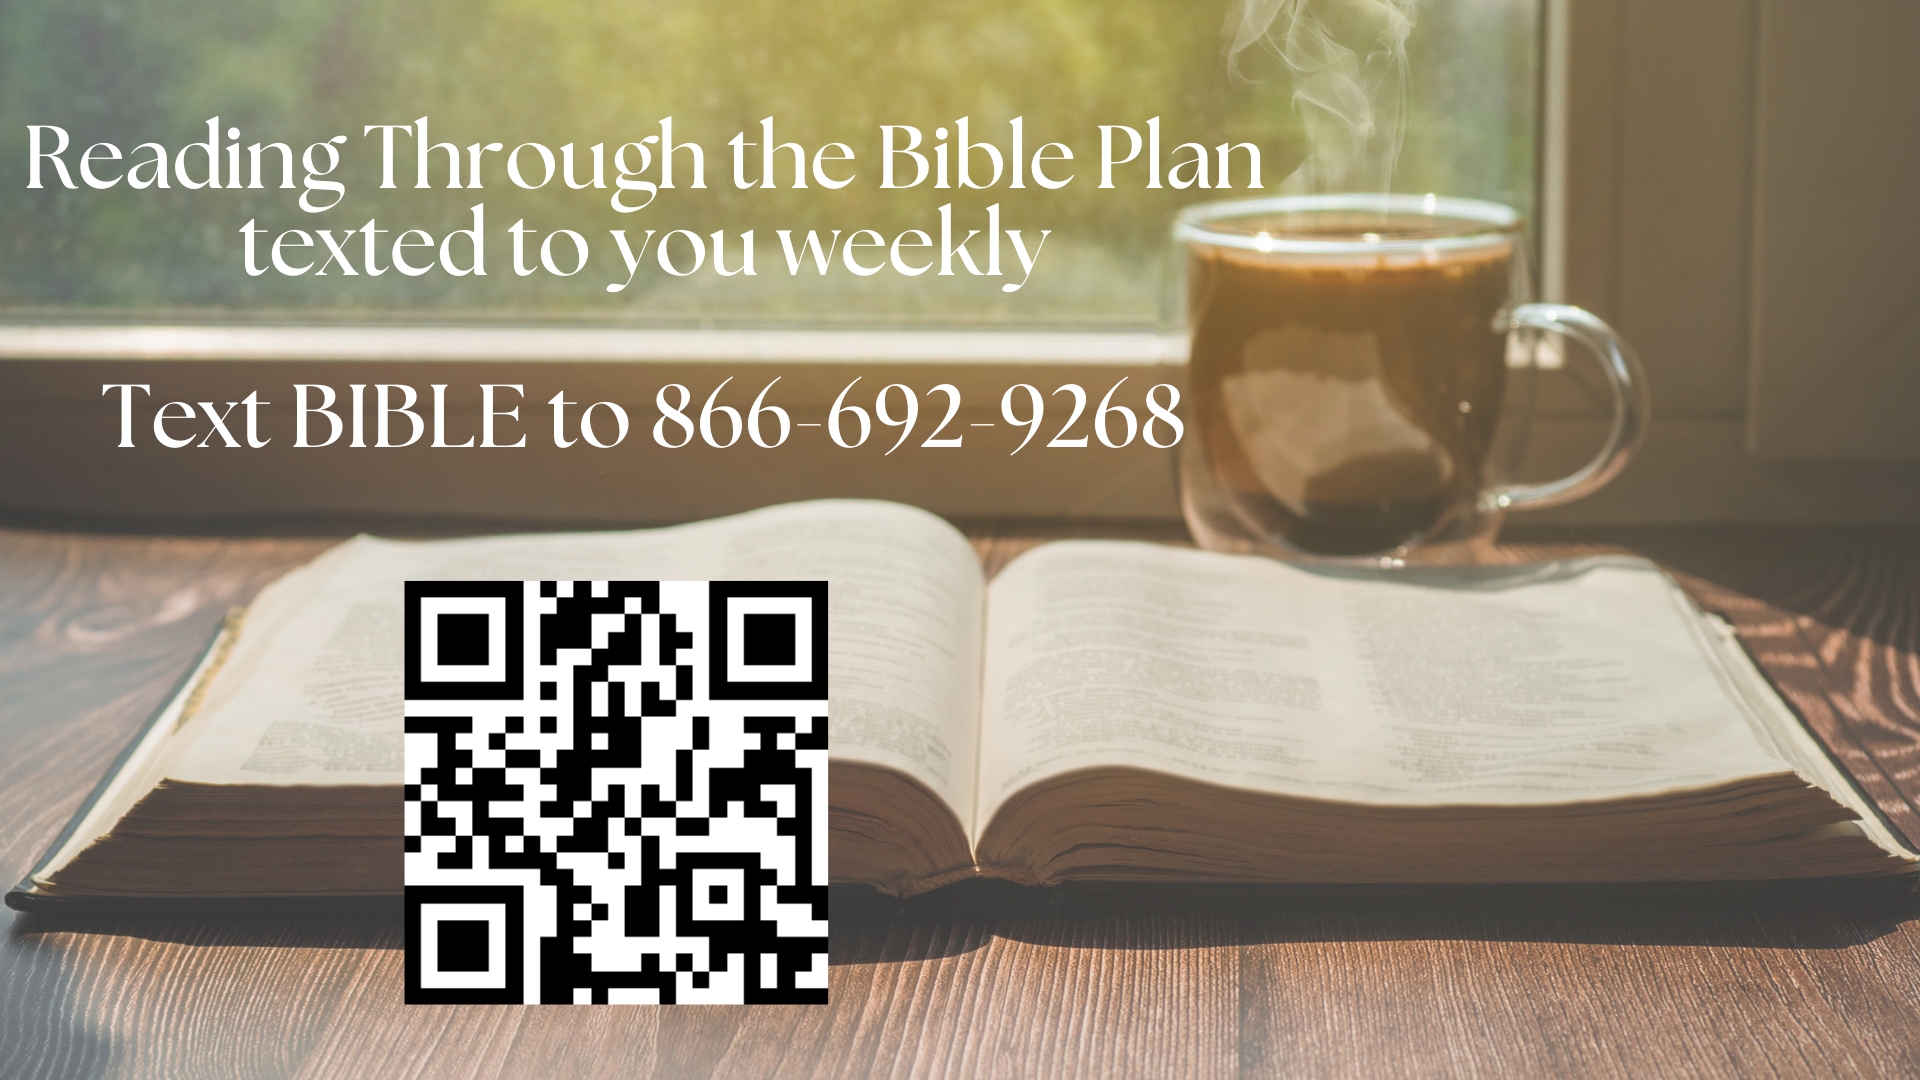 Reading through the bible plan texted to you weekly.